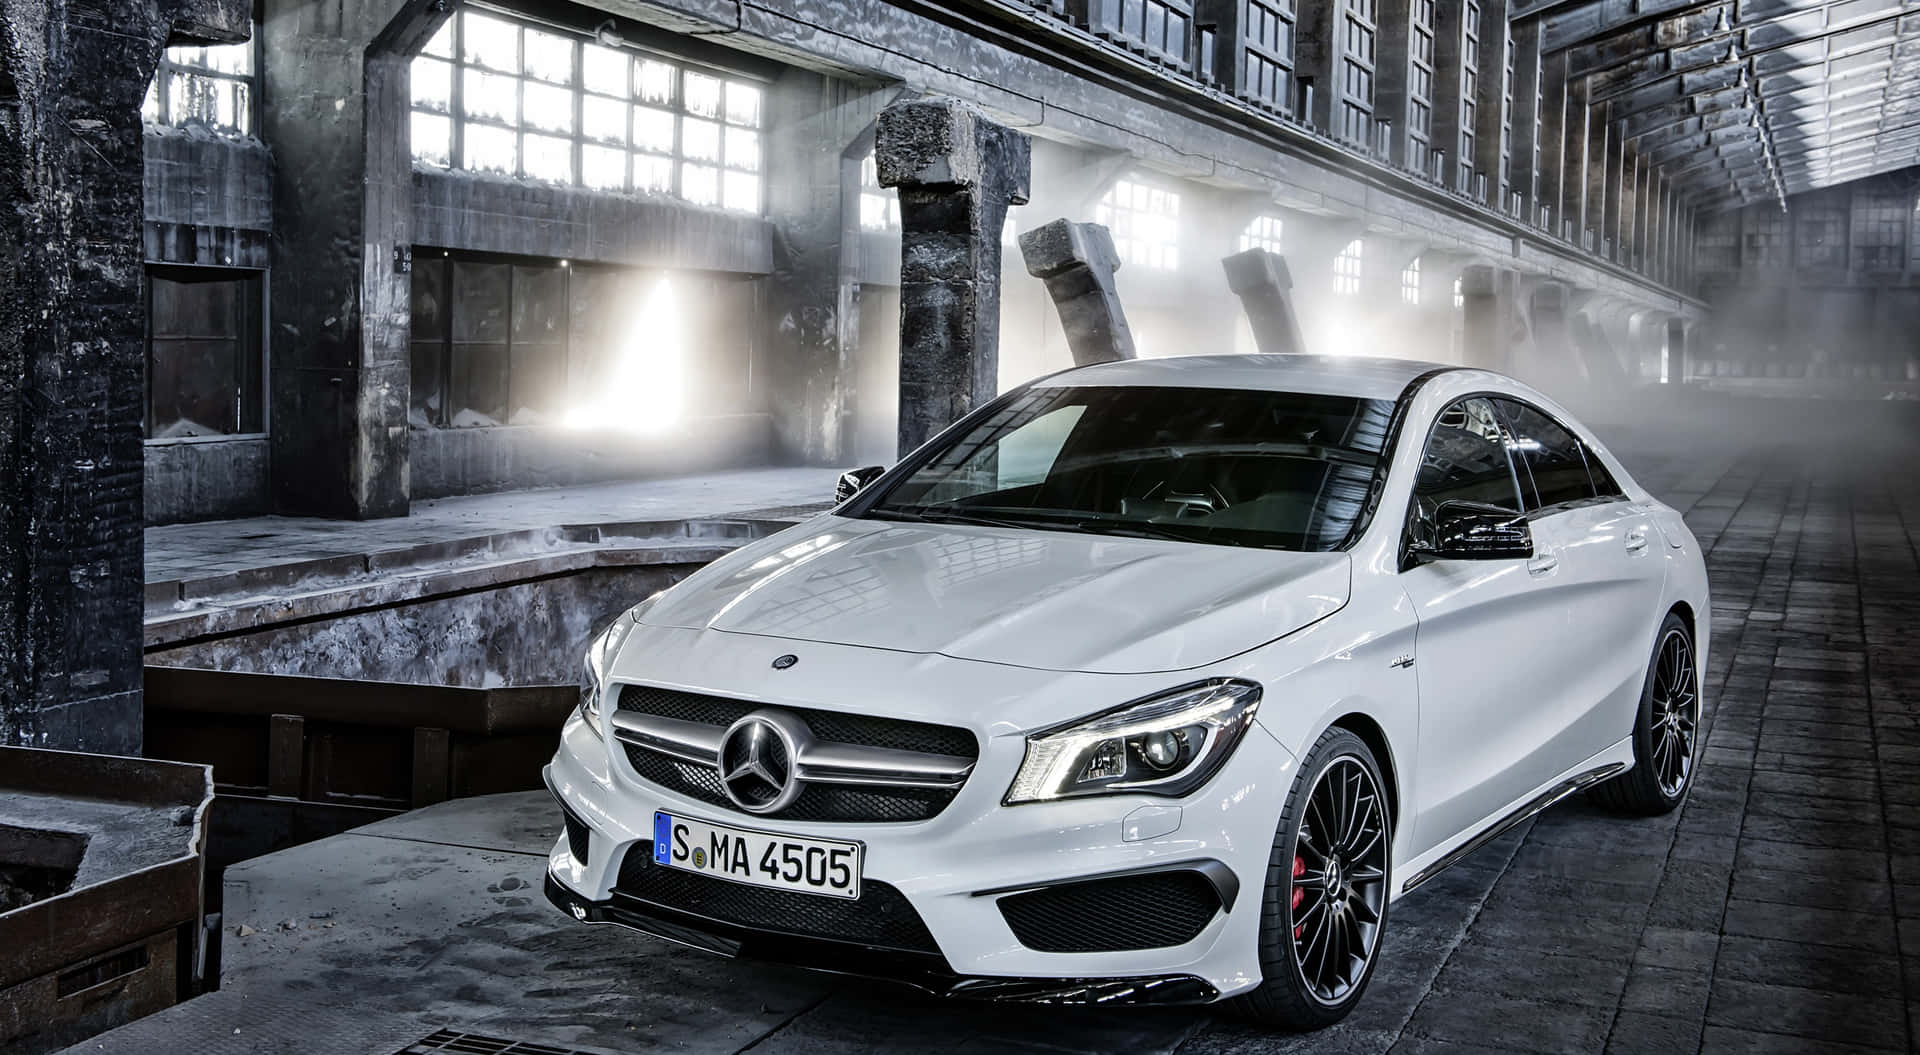 Sleek and Stylish Mercedes Benz CLA-Class on the Road Wallpaper